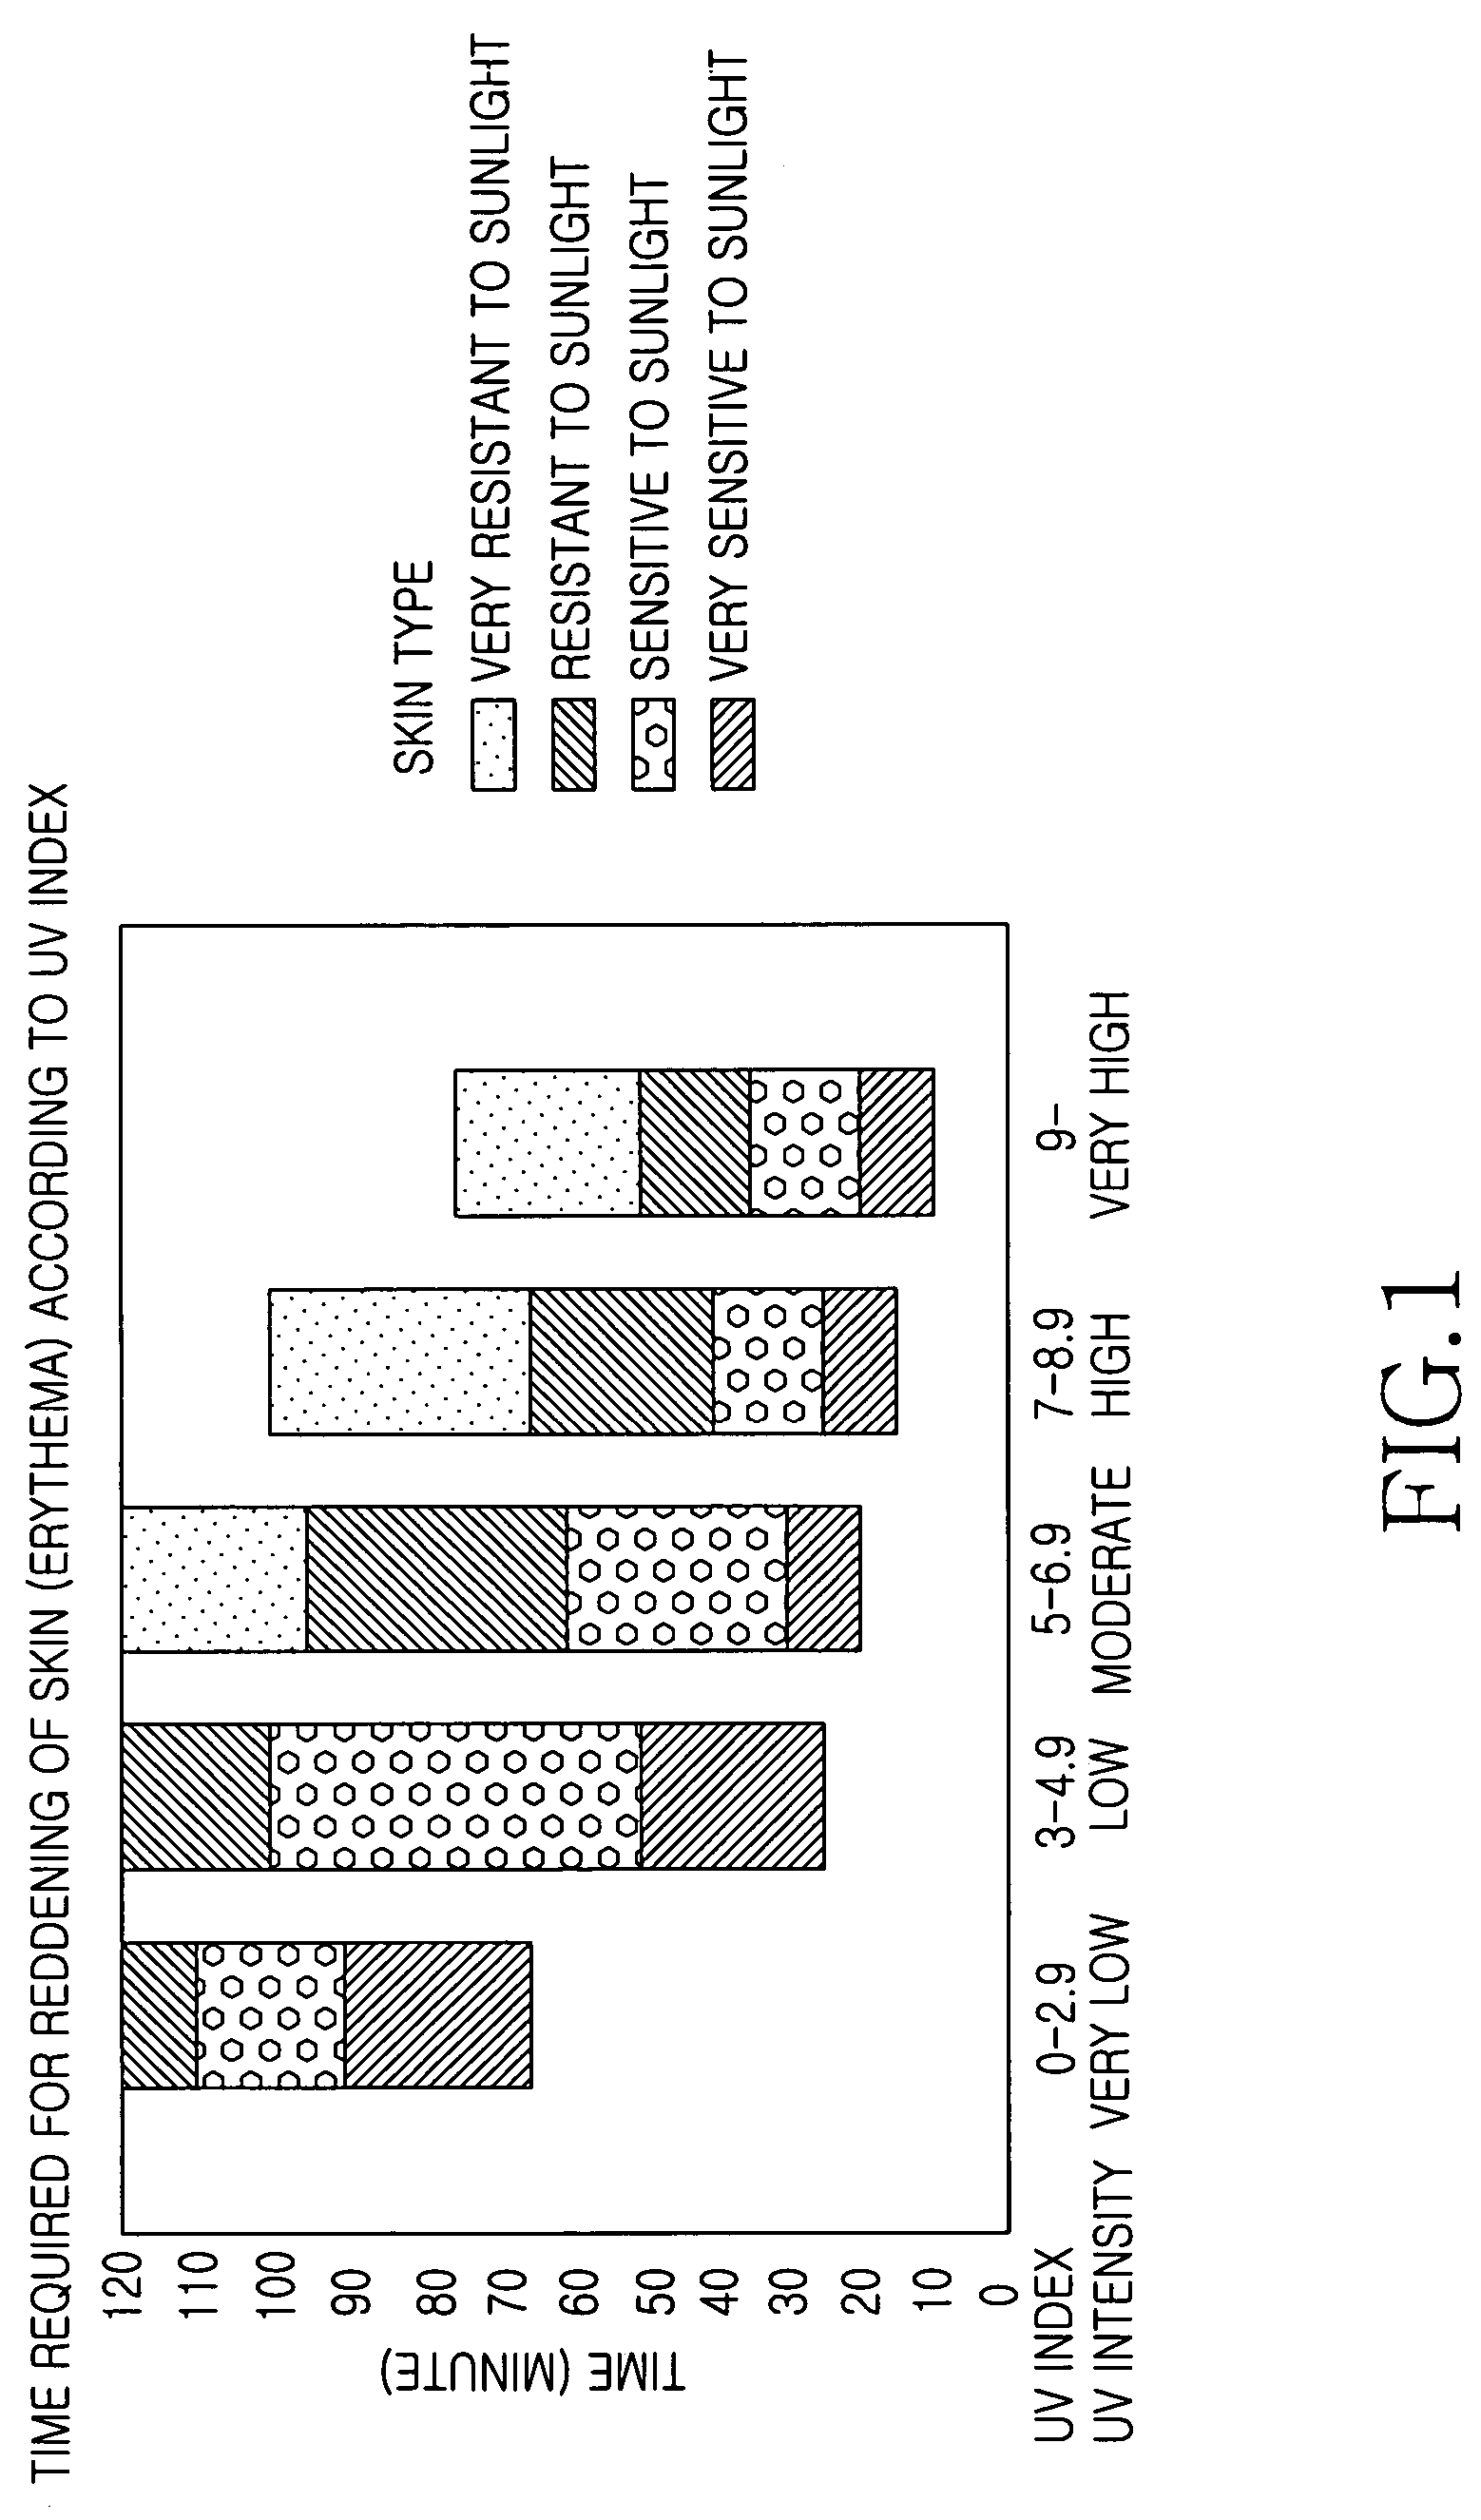 Service implementing method and apparatus based on an ultraviolet index in a mobile terminal